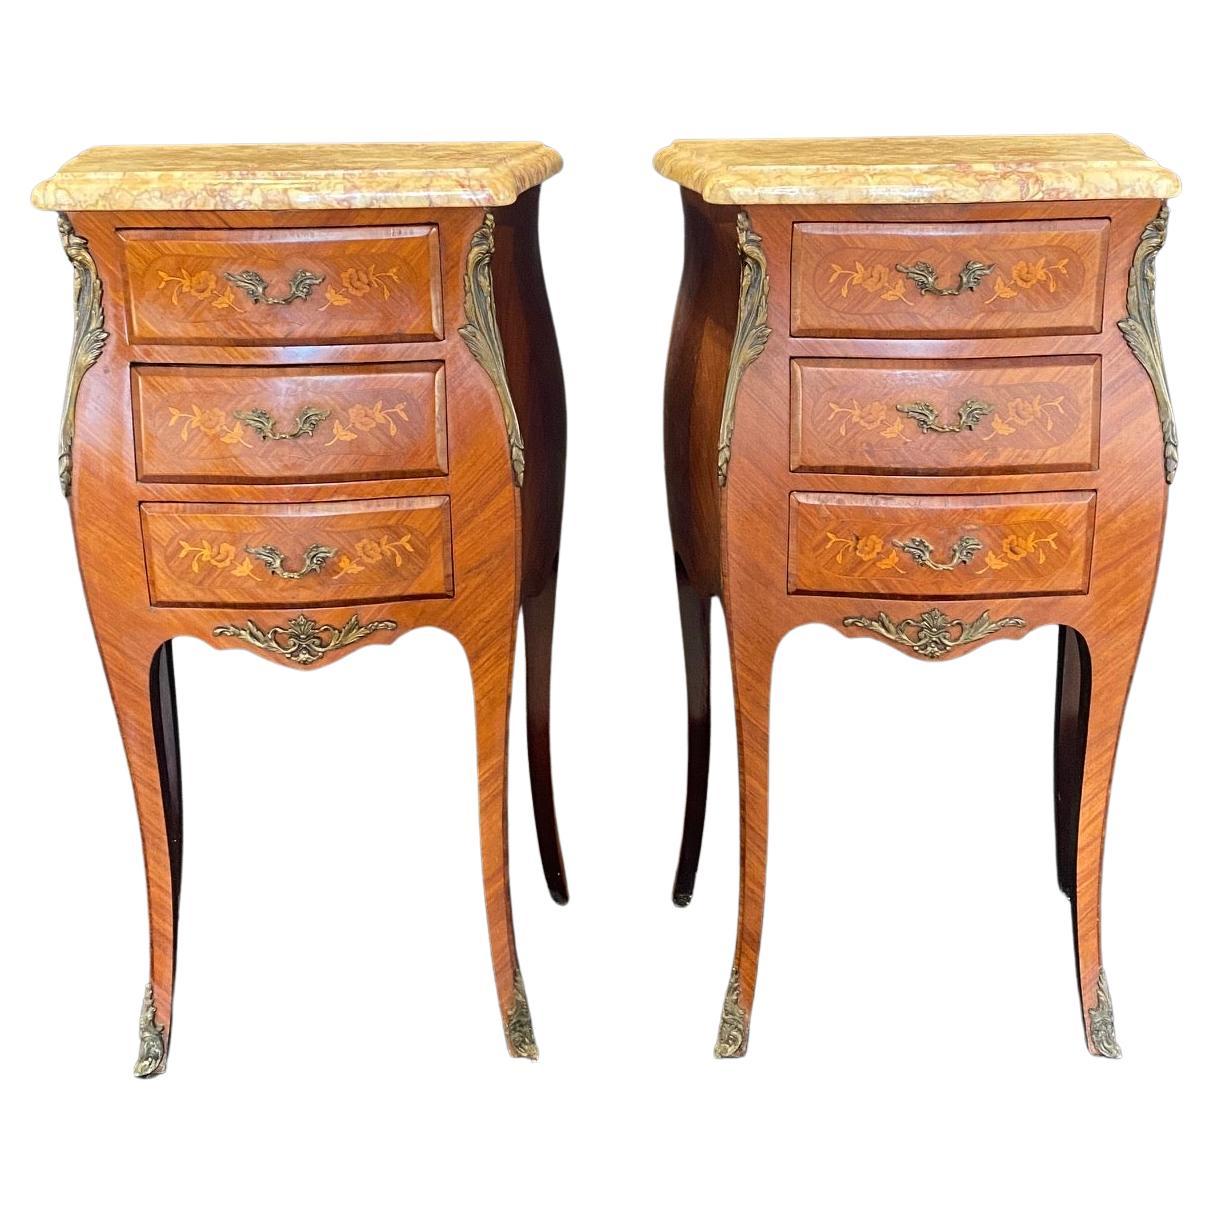 Handsome Pair of Antique French Inlaid Walnut & Marble Top Nighttands